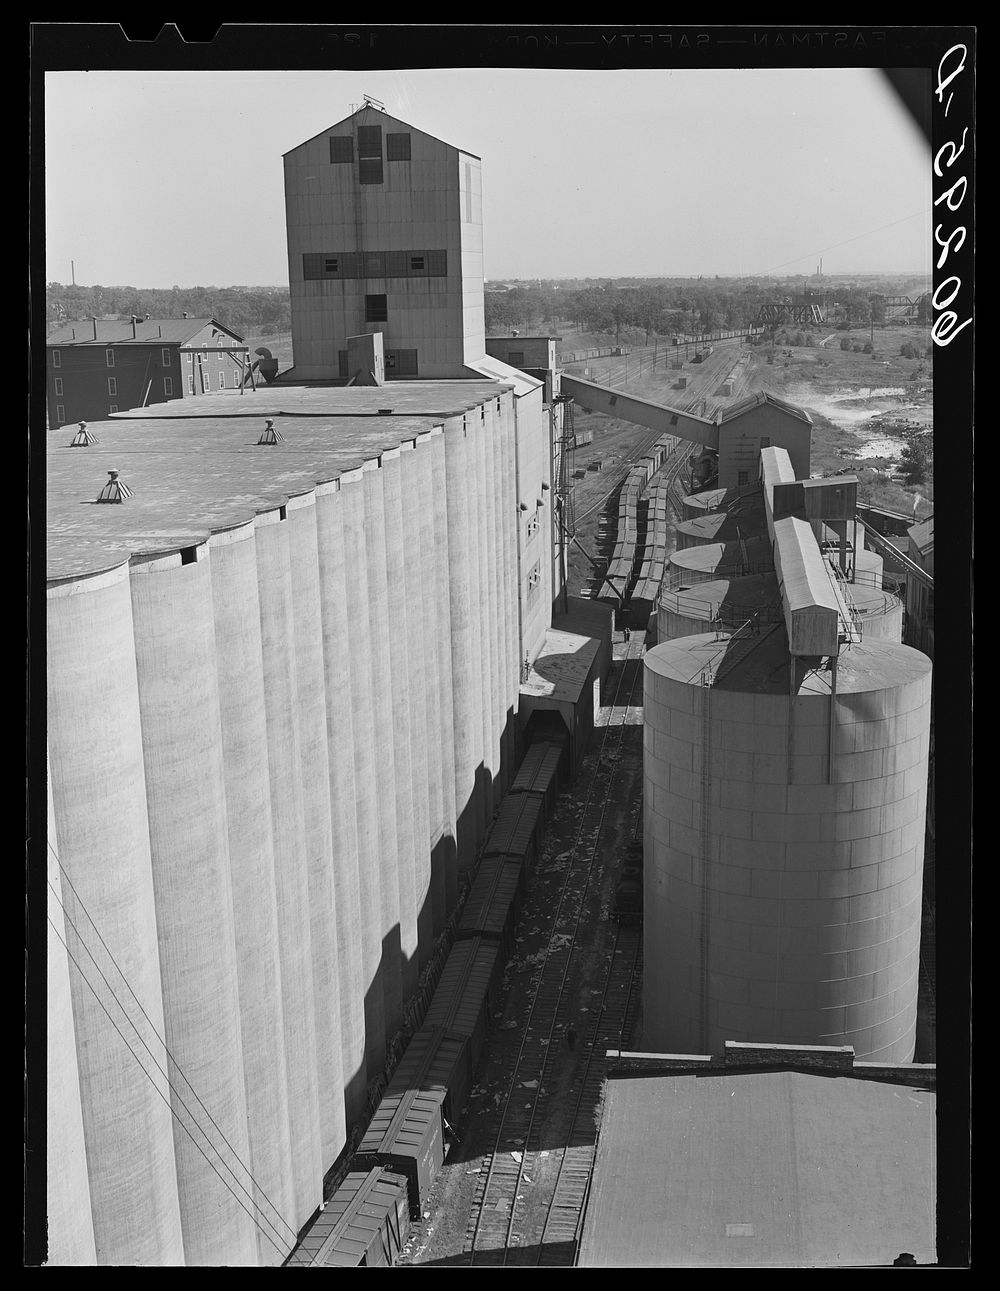 Part of Archer-Daniels Company grain elevator. Minneapolis, Minnesota. Sourced from the Library of Congress.